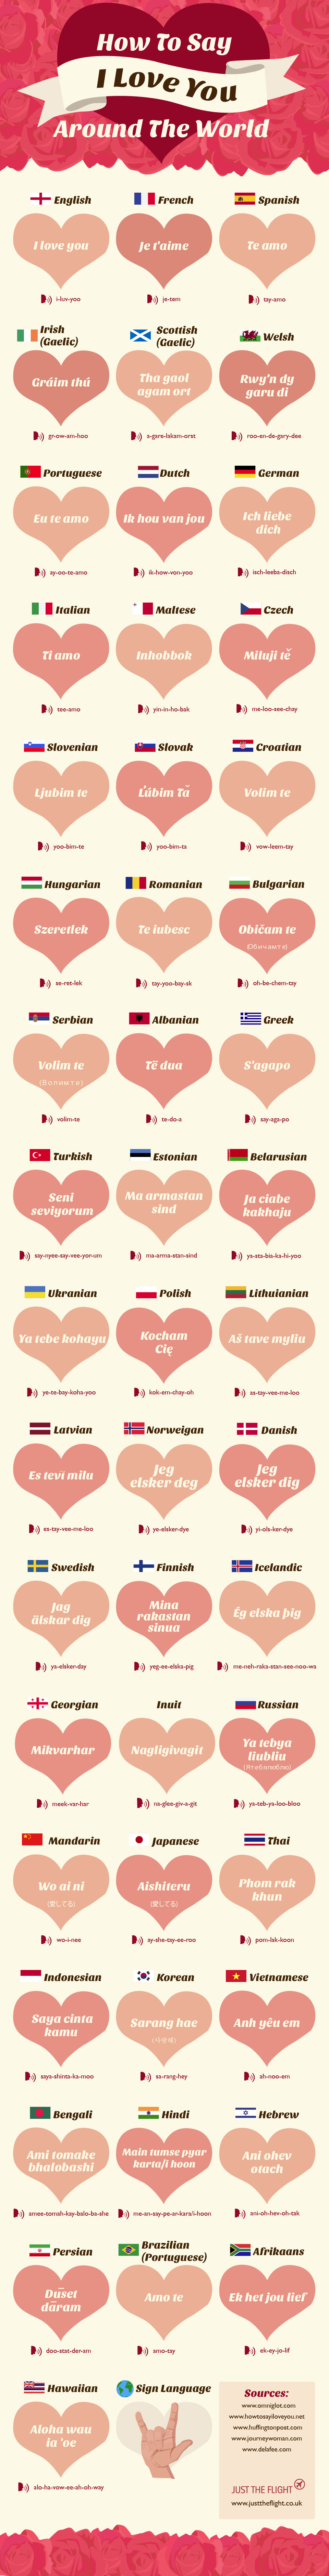 How To Say I Love You Around The World Just The Flight Travel Blog